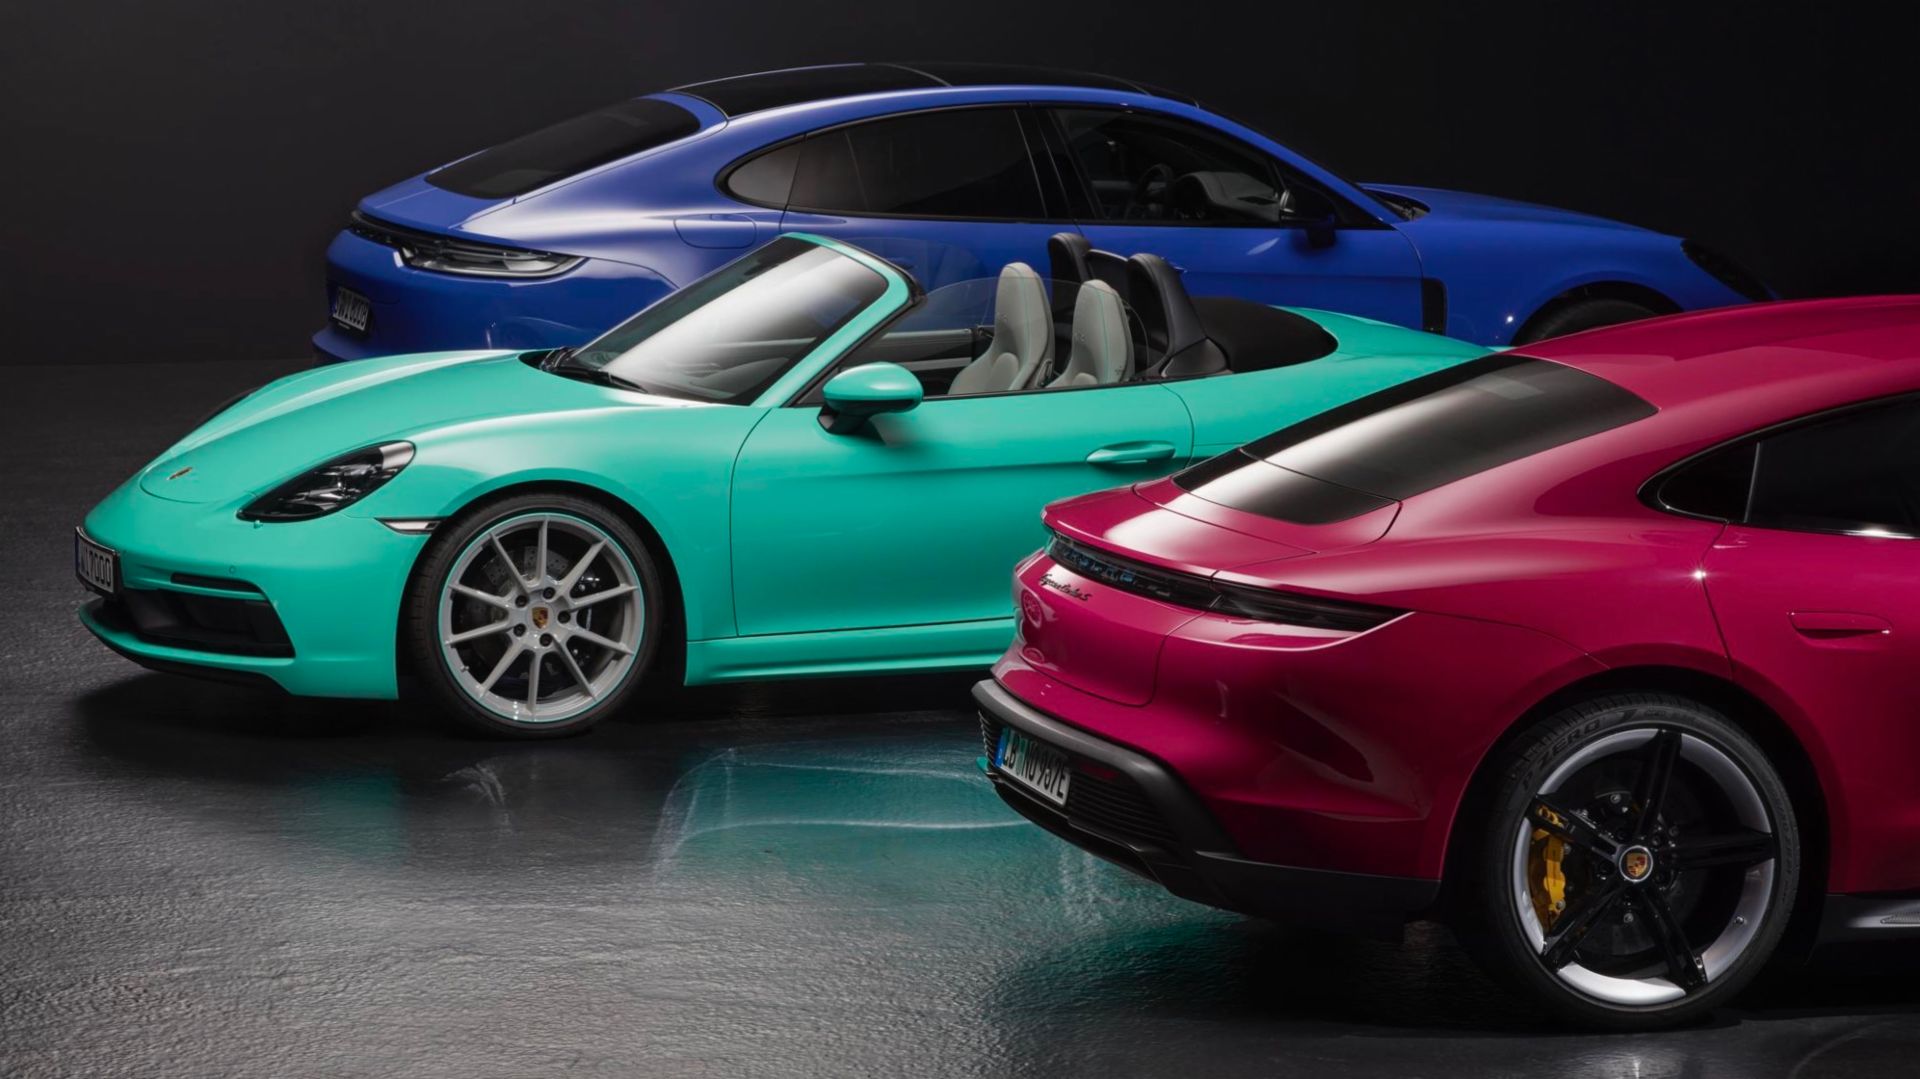 Porsche’s Paint to Sample allows shoppers to customize their vehicle’s color Auto Recent